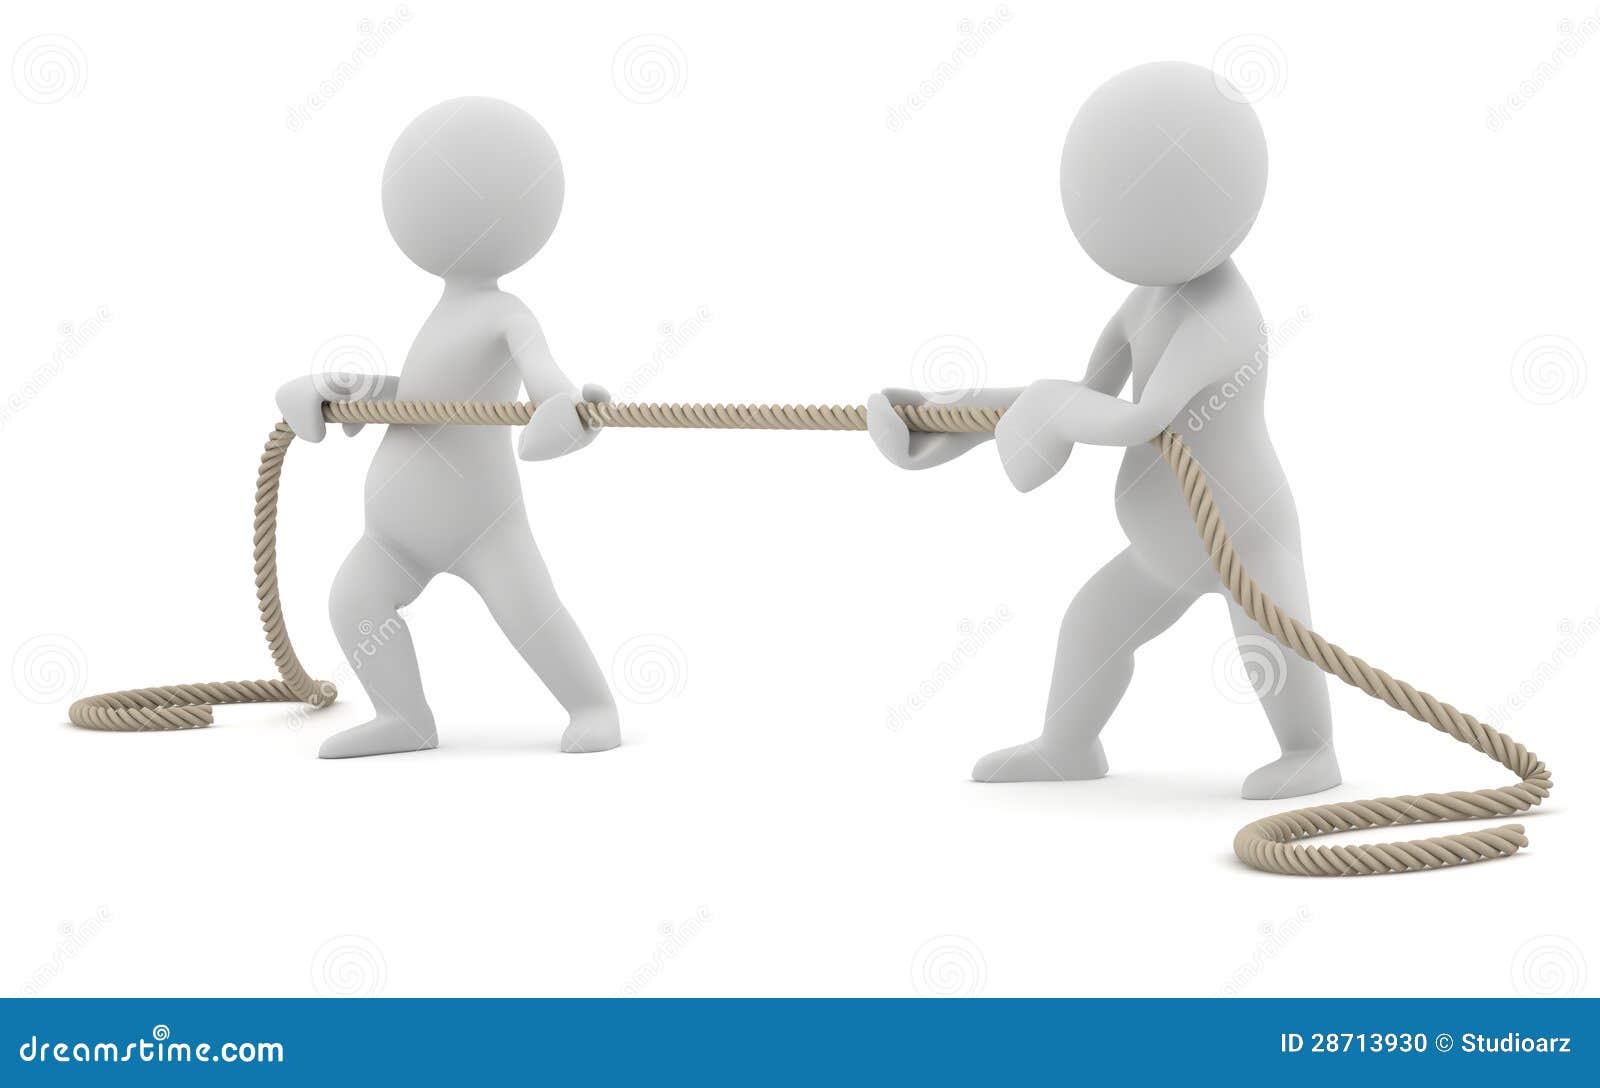 clipart man pulling rope - photo #7